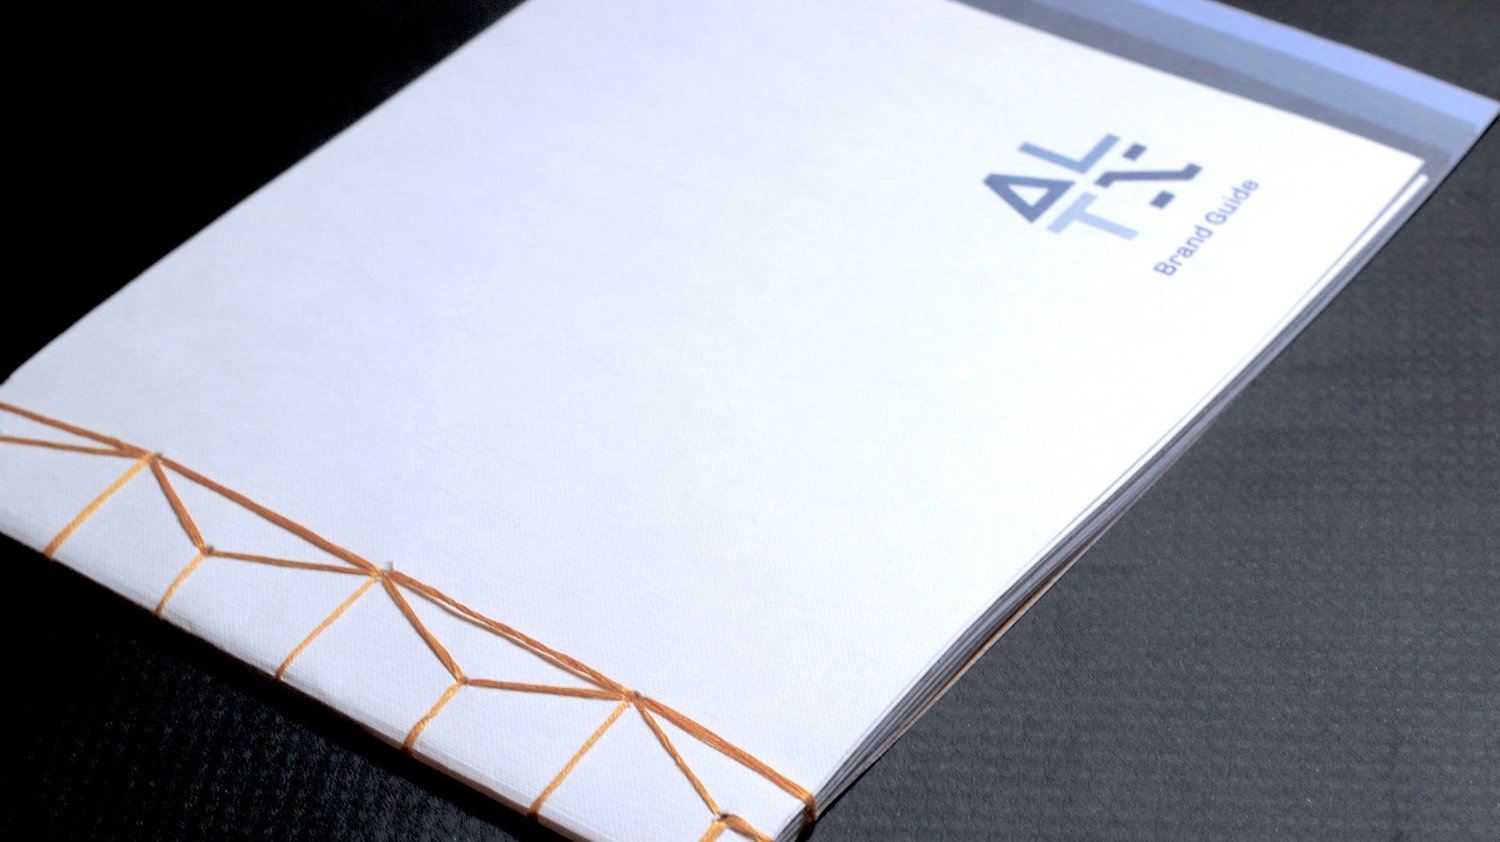 The Japanese bound ALTX brand book with a staggered edge to mark sections.